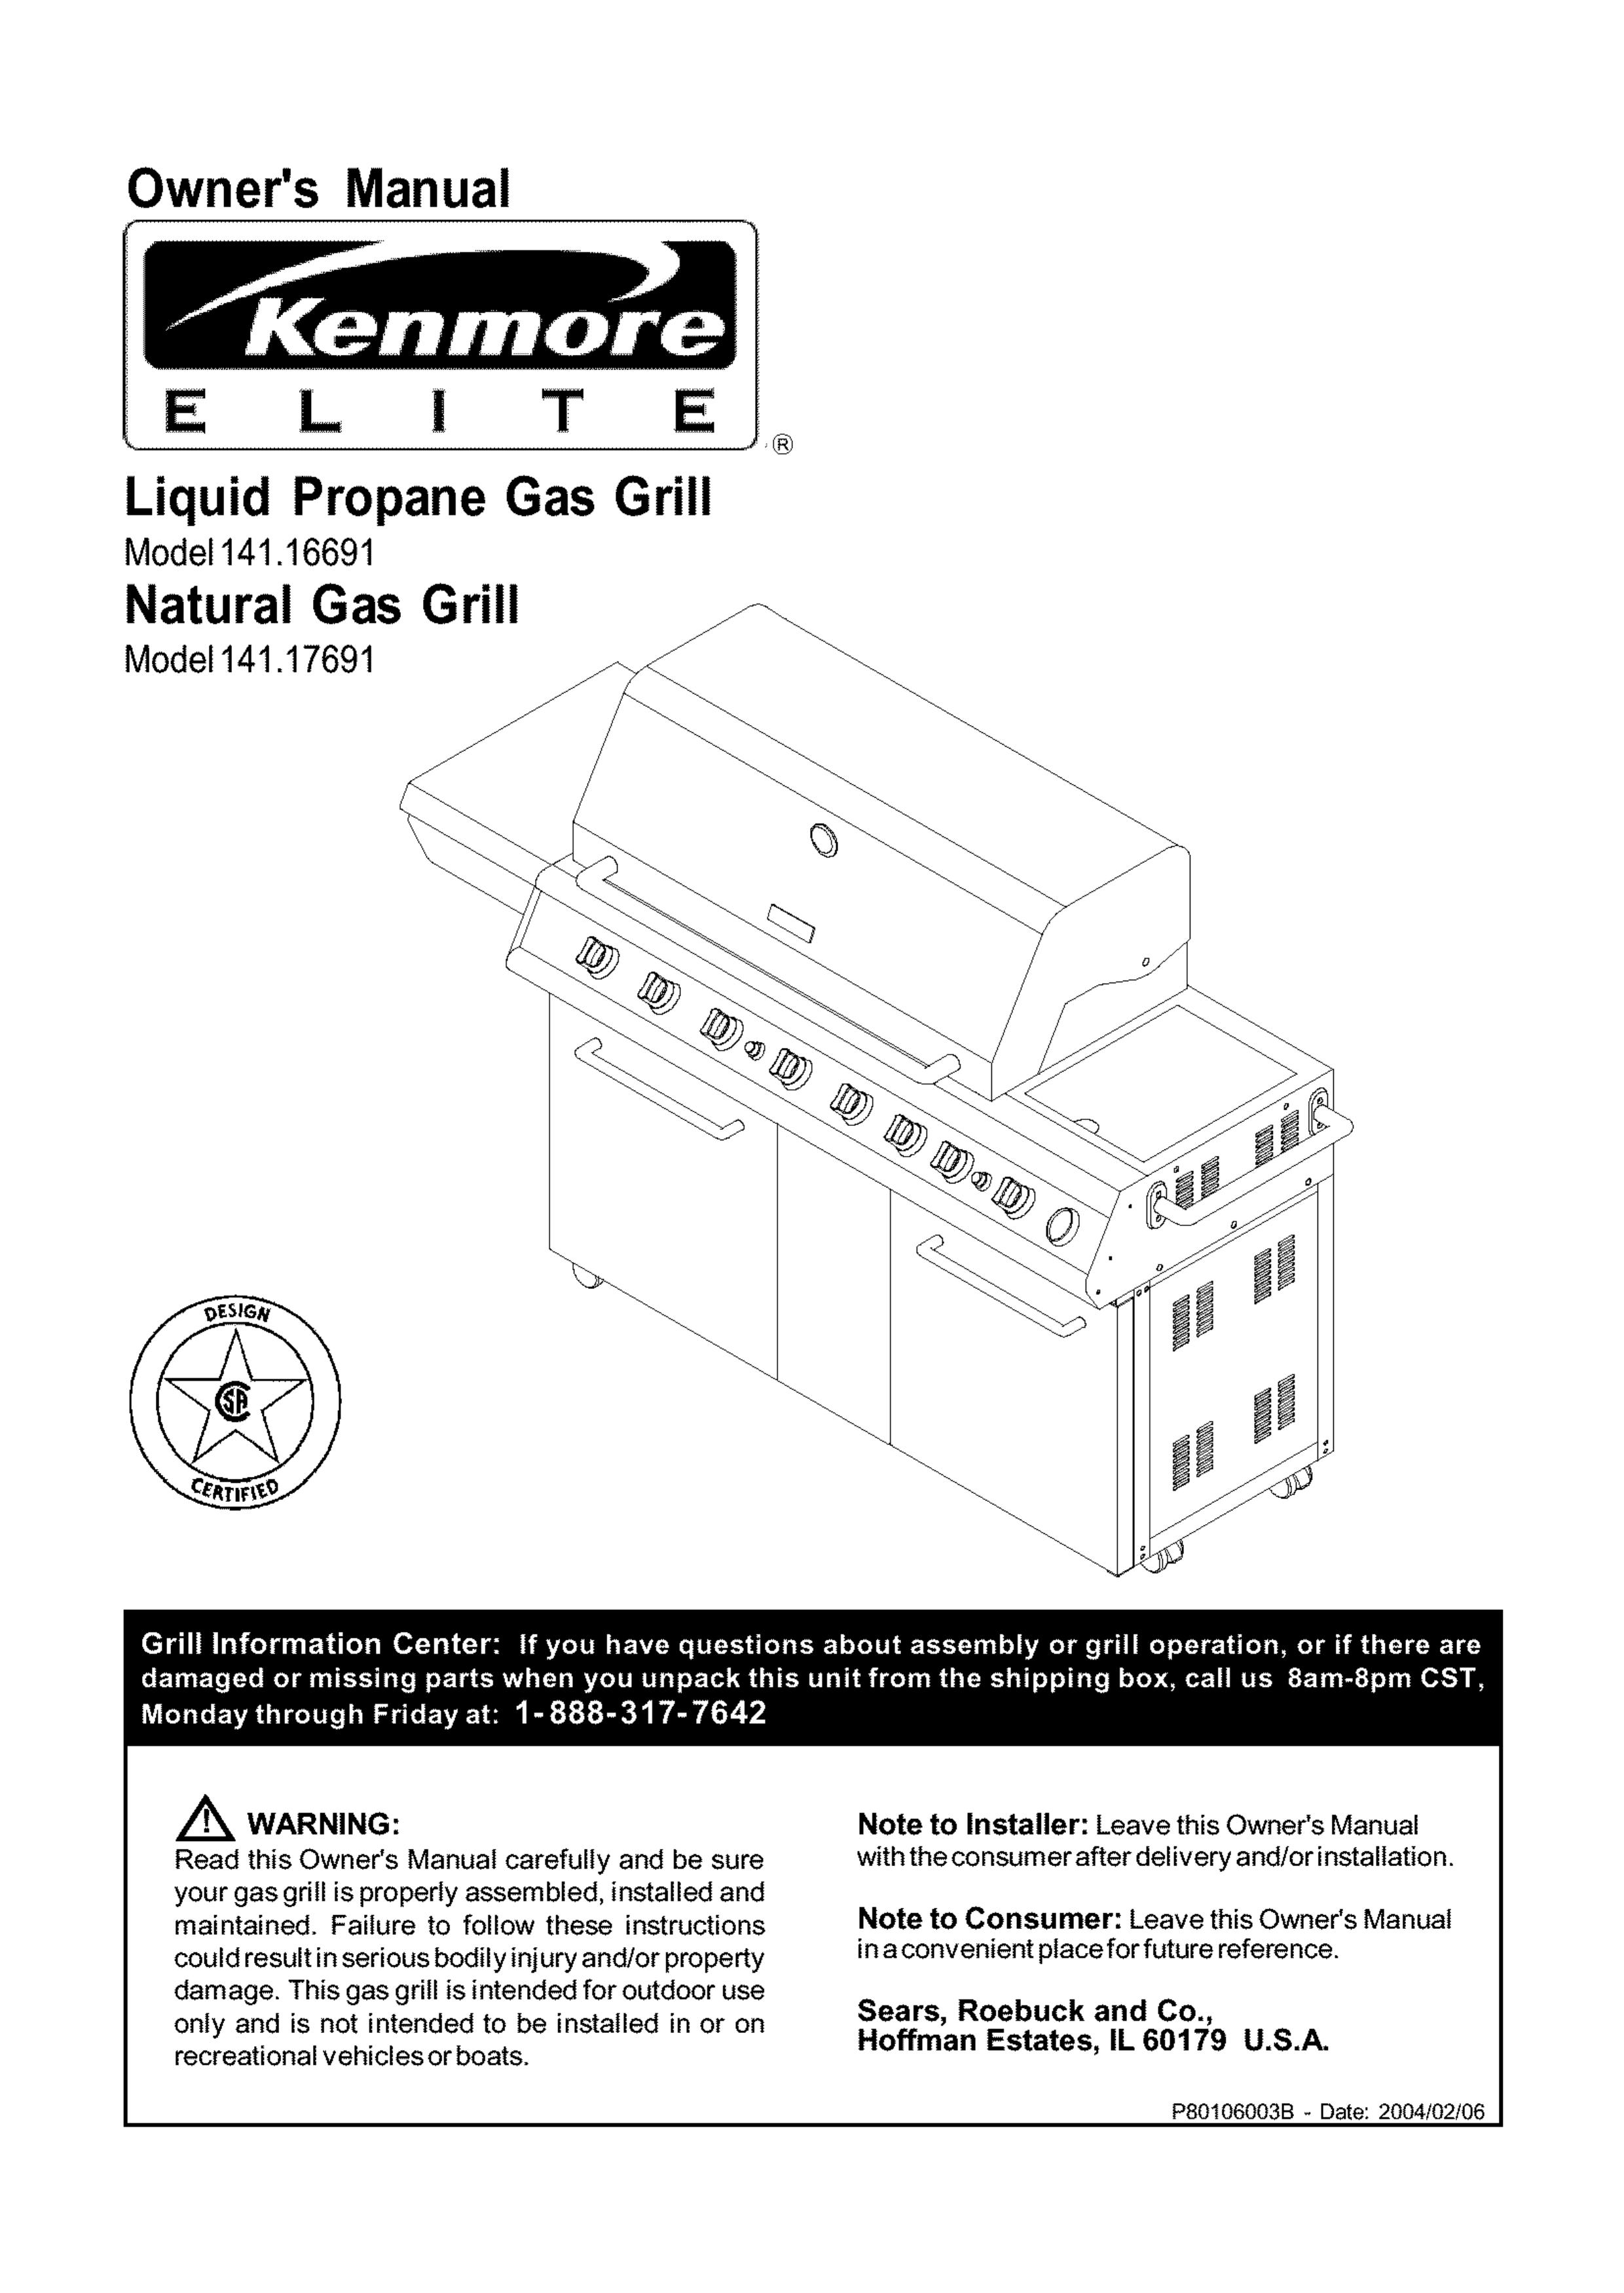 Kenmore 141.17691 Gas Grill User Manual